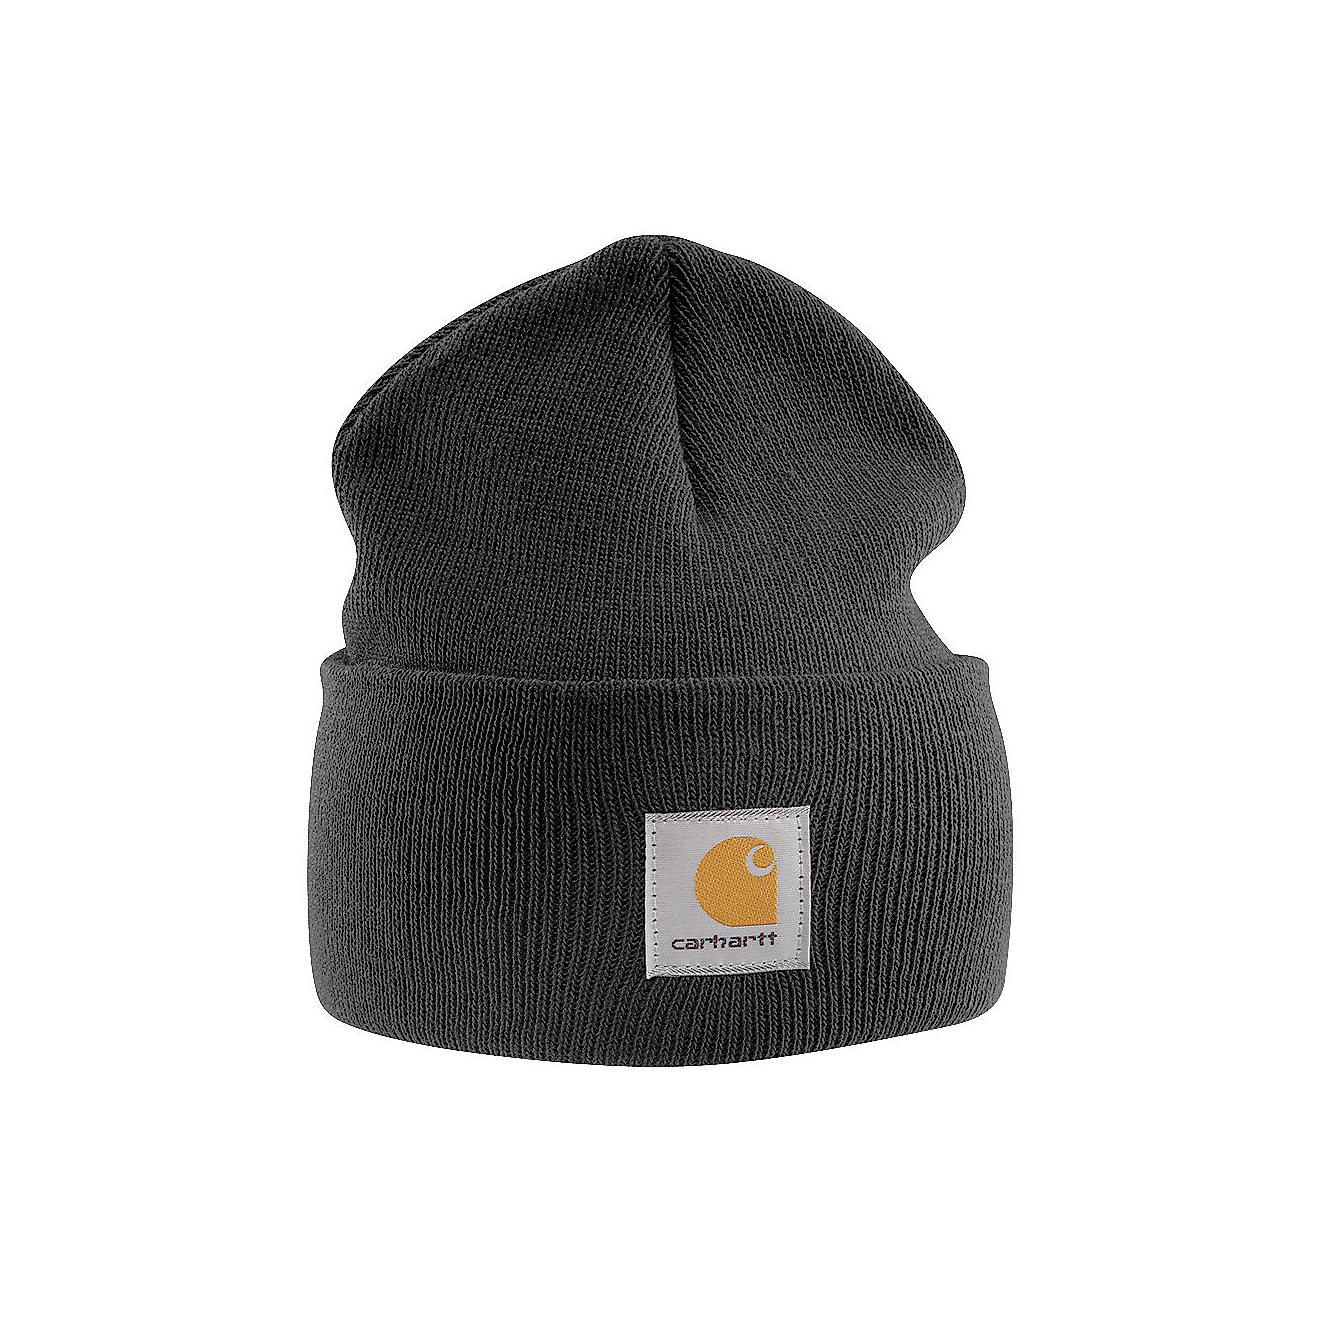 Carhartt adult acrylic watch hat Tentacle porn stories